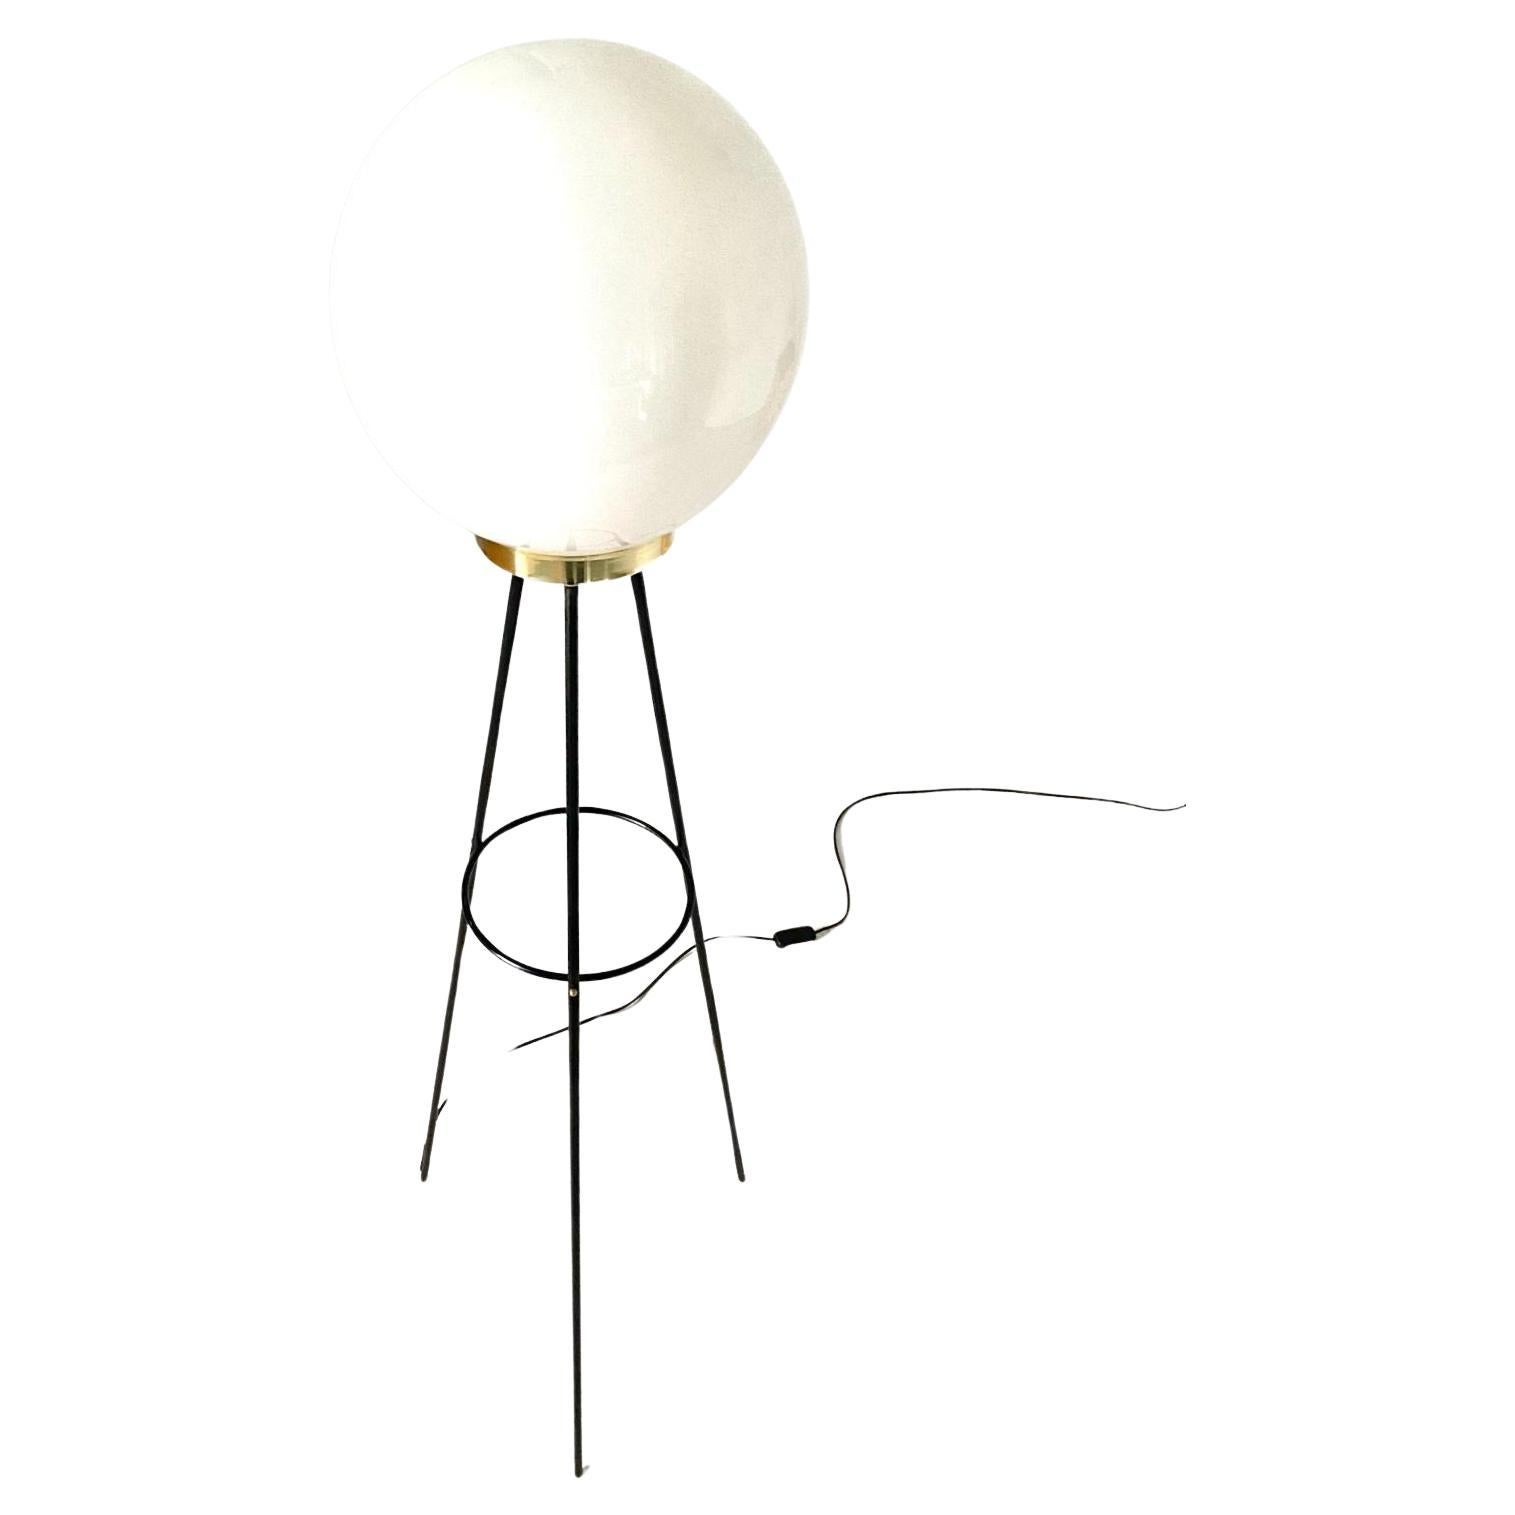 A 1950s vintage floor lamp by Stilnovo, Italy. Tripode structure made of 3 iron black sticks that support an white opaline bowl with brass base. Restored as follows:

Rewired and new electrical parts;
Iron parts have been repainted;
Brass ringd has